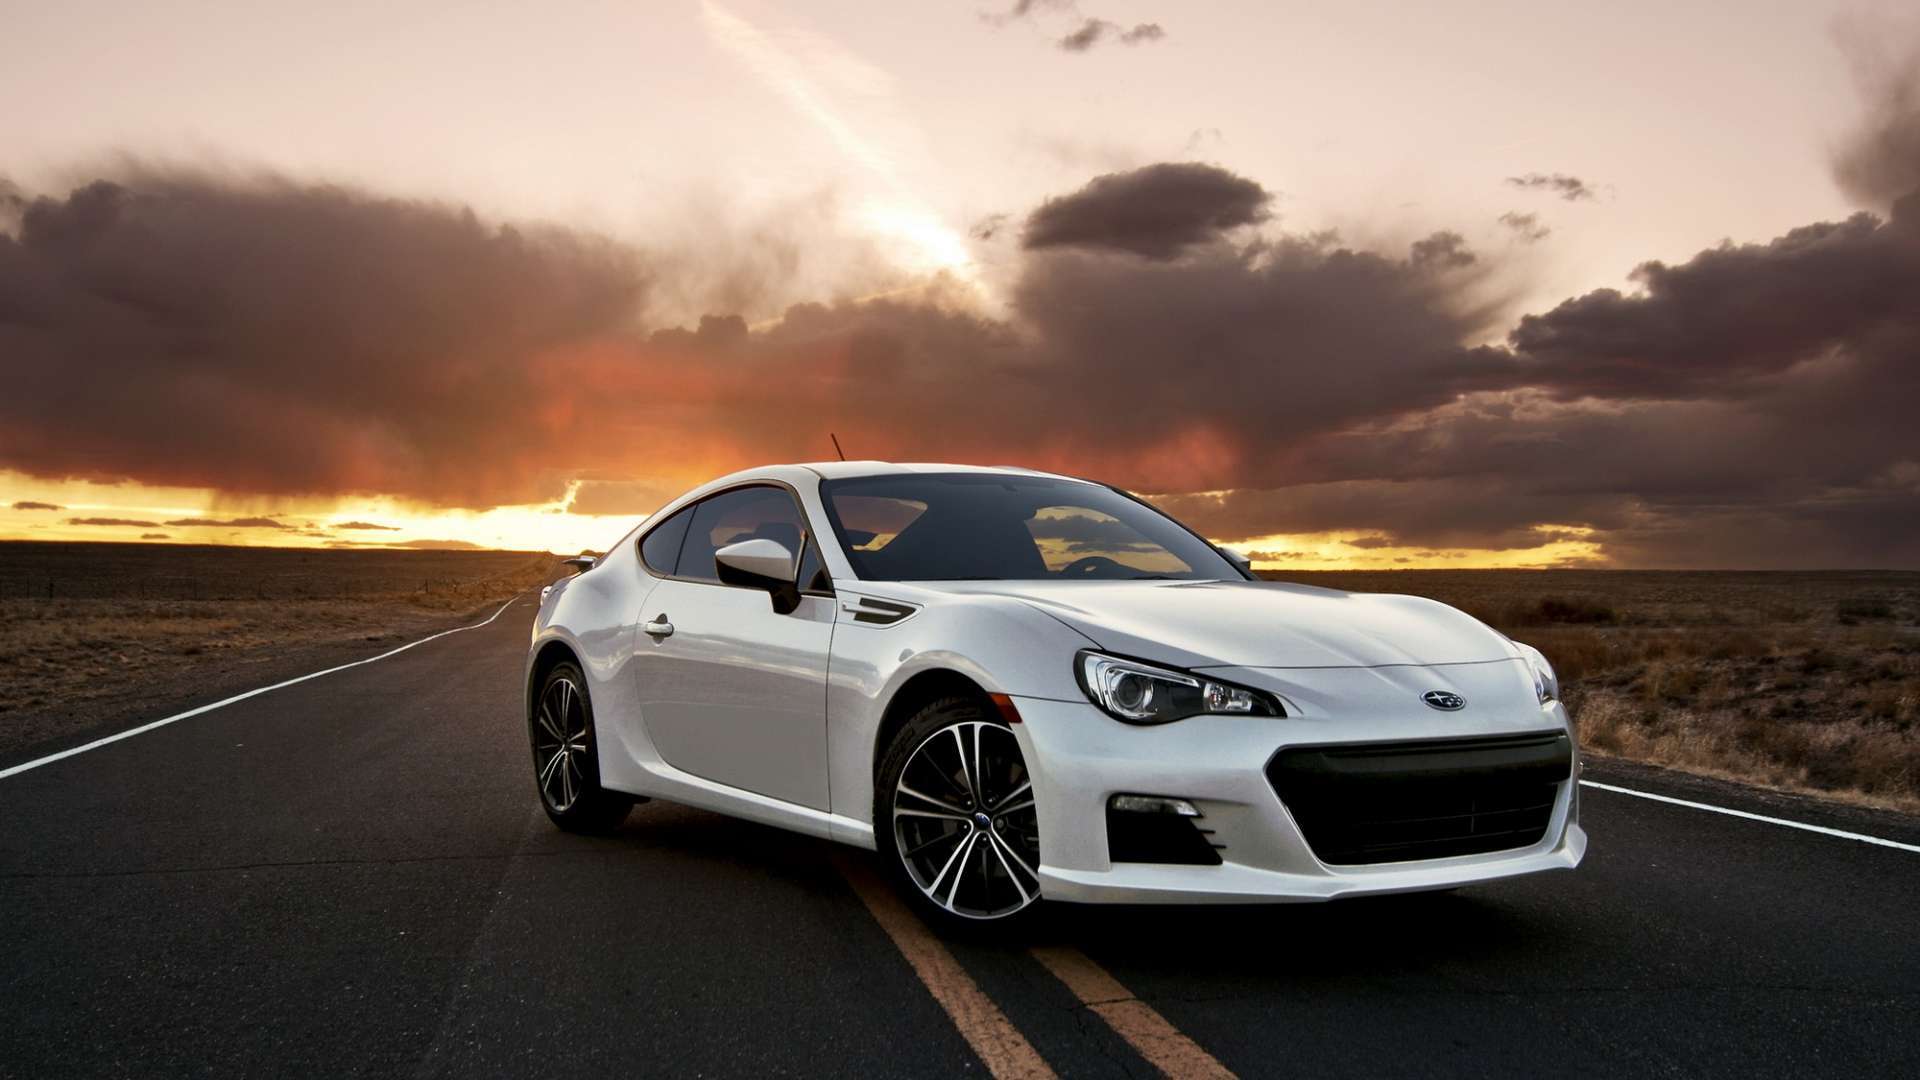 Wallpaper Subaru Brz On The Road HD 1080p Upload At March